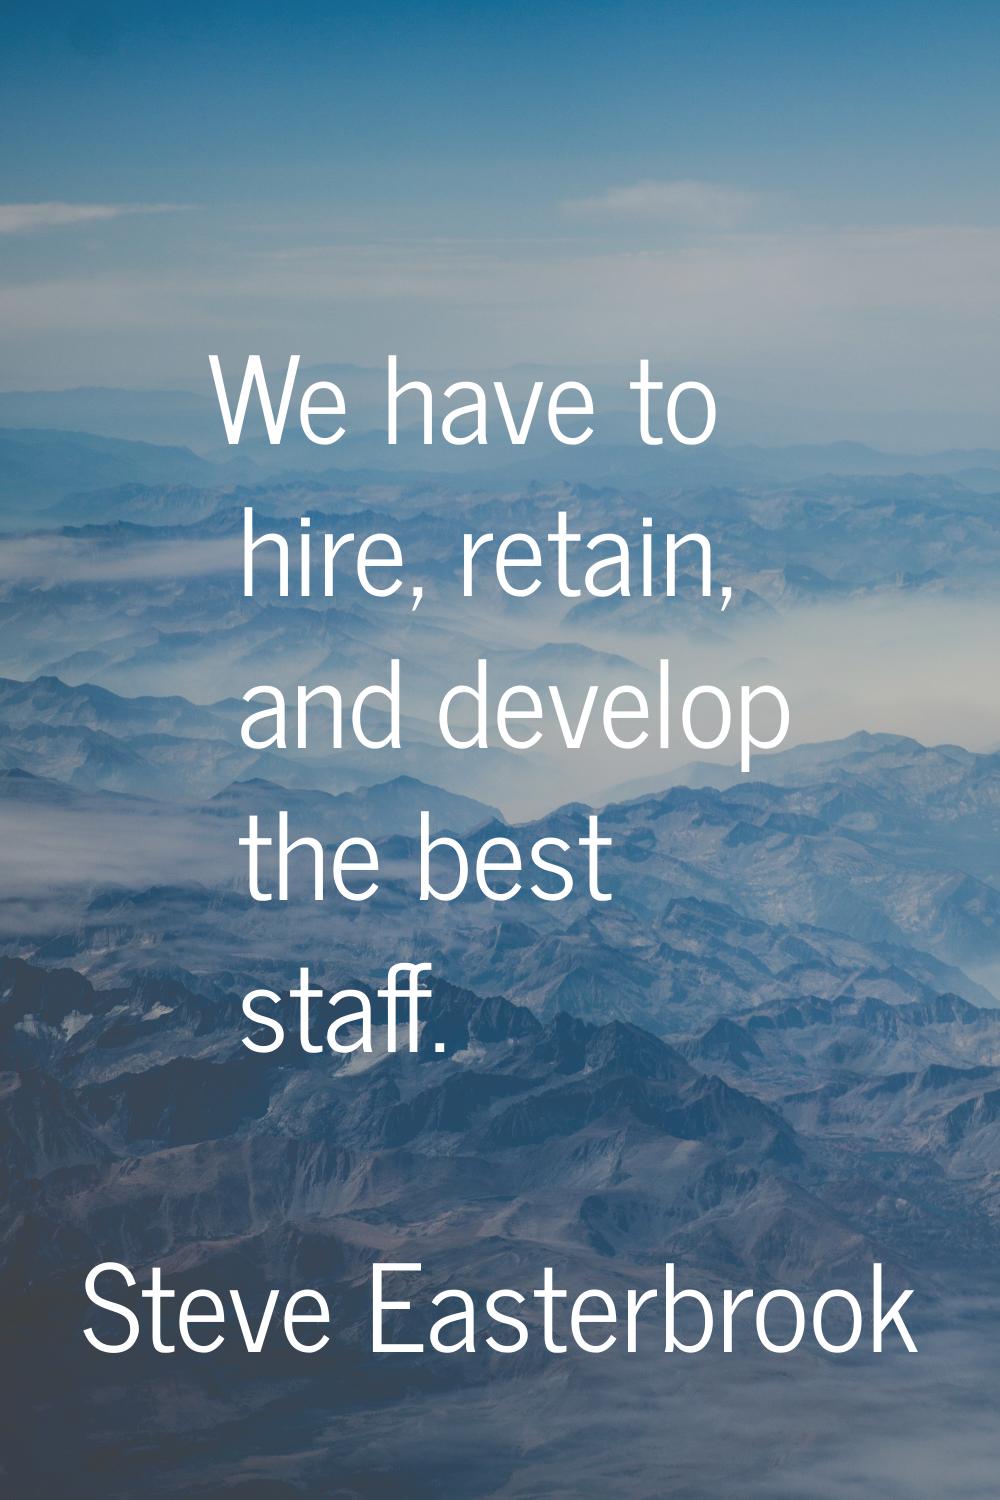 We have to hire, retain, and develop the best staff.